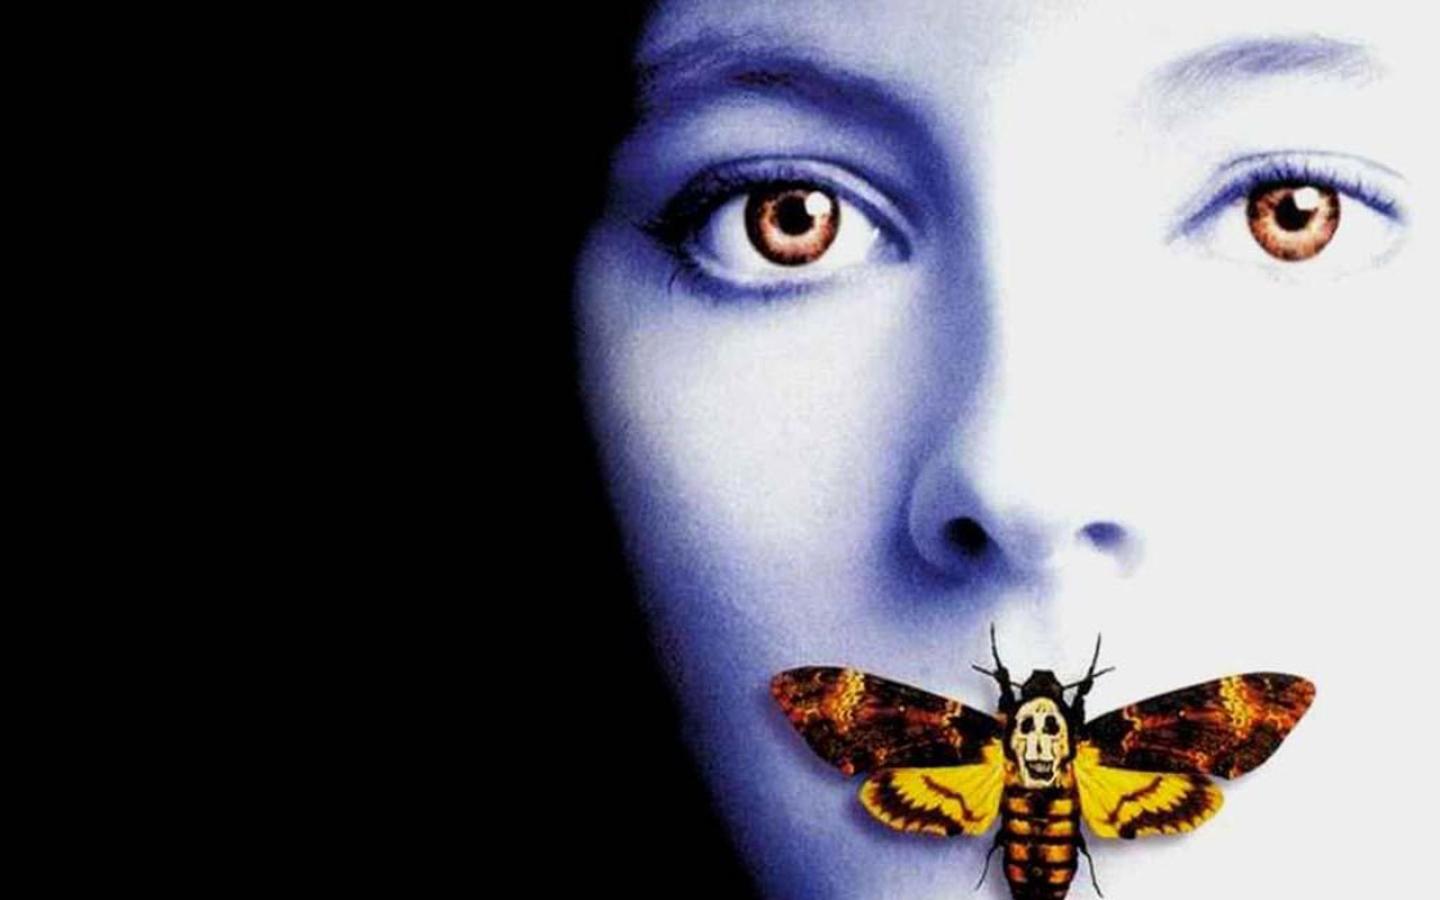 The Silence Of The Lambs Wallpaper #1 1440 x 900 